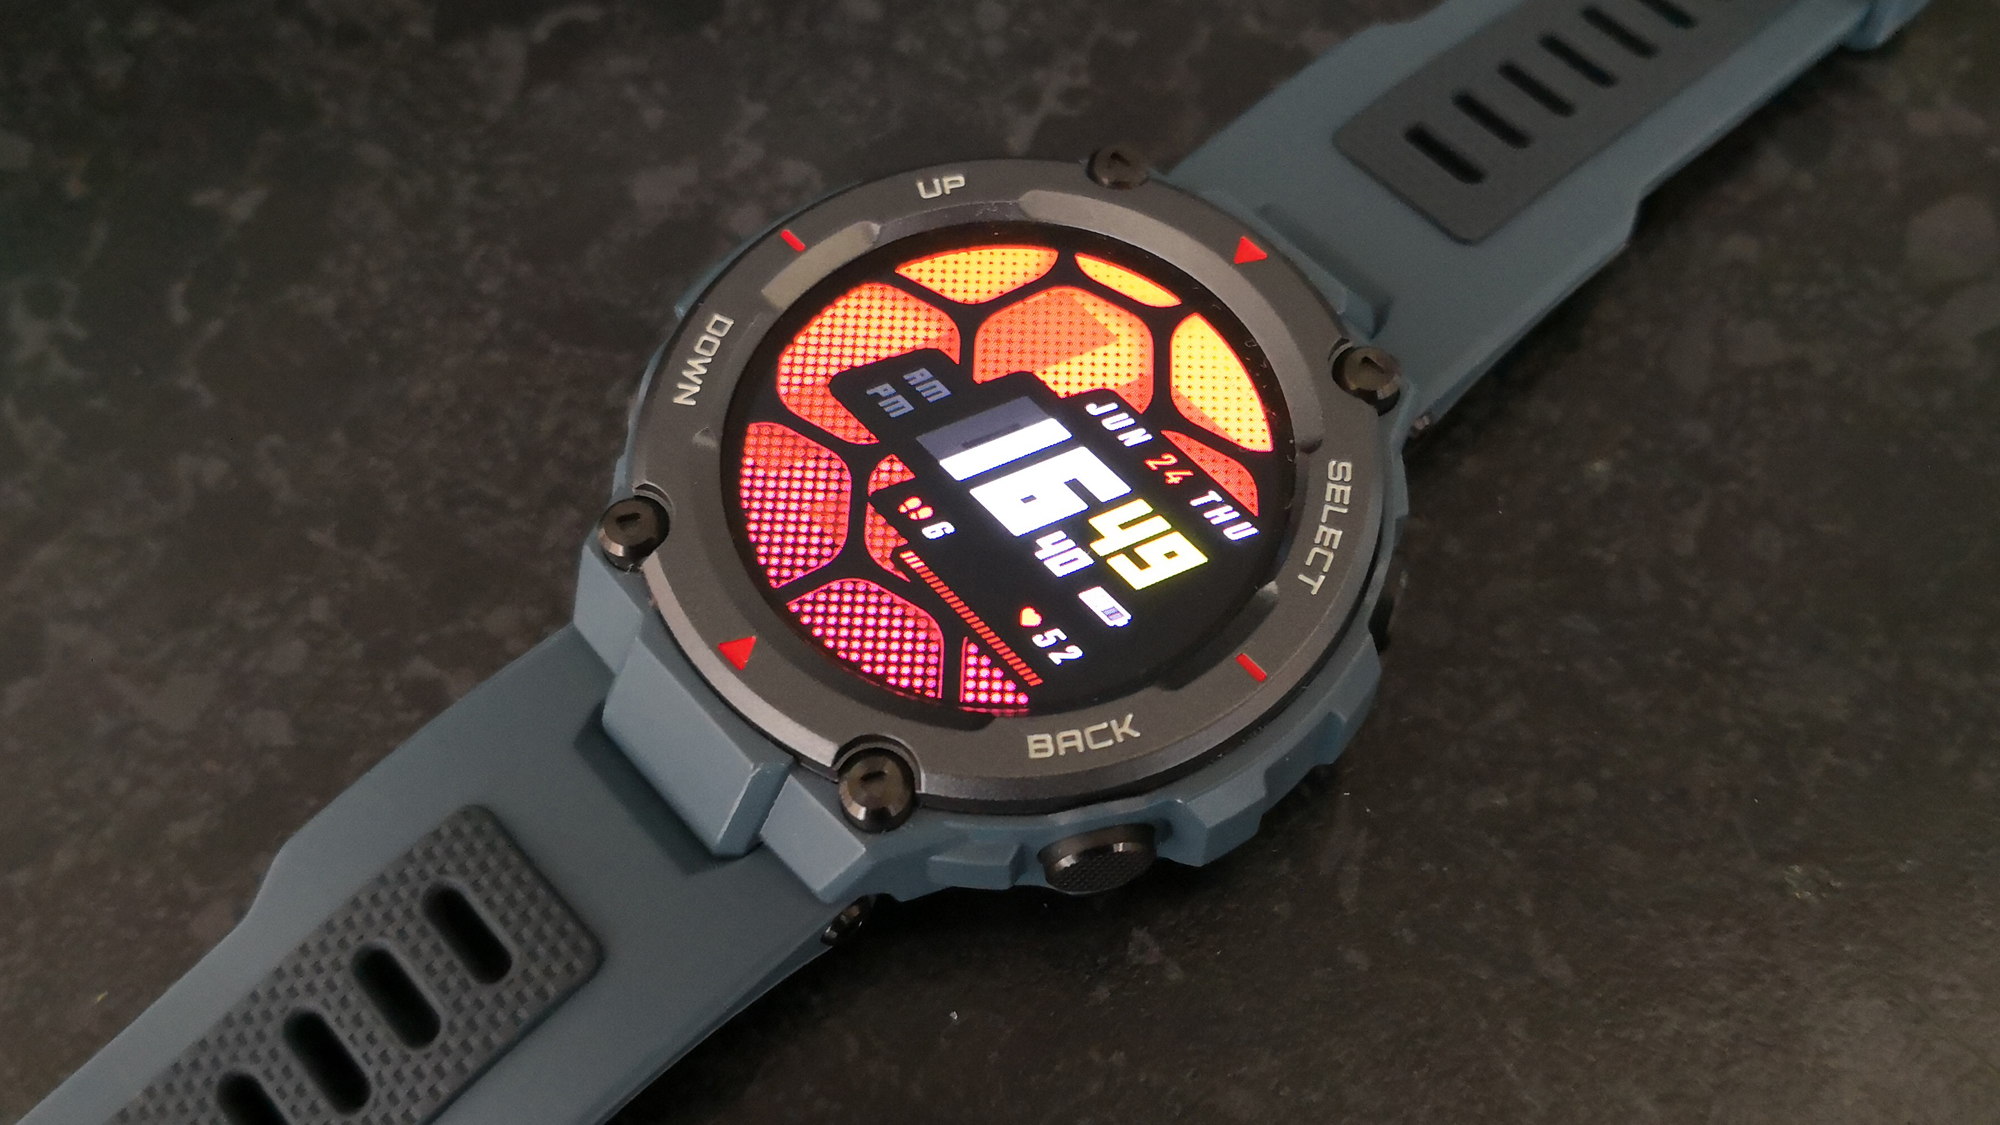 The Amazfit T-Rex Pro watch lies on a table with the face of the watch showing